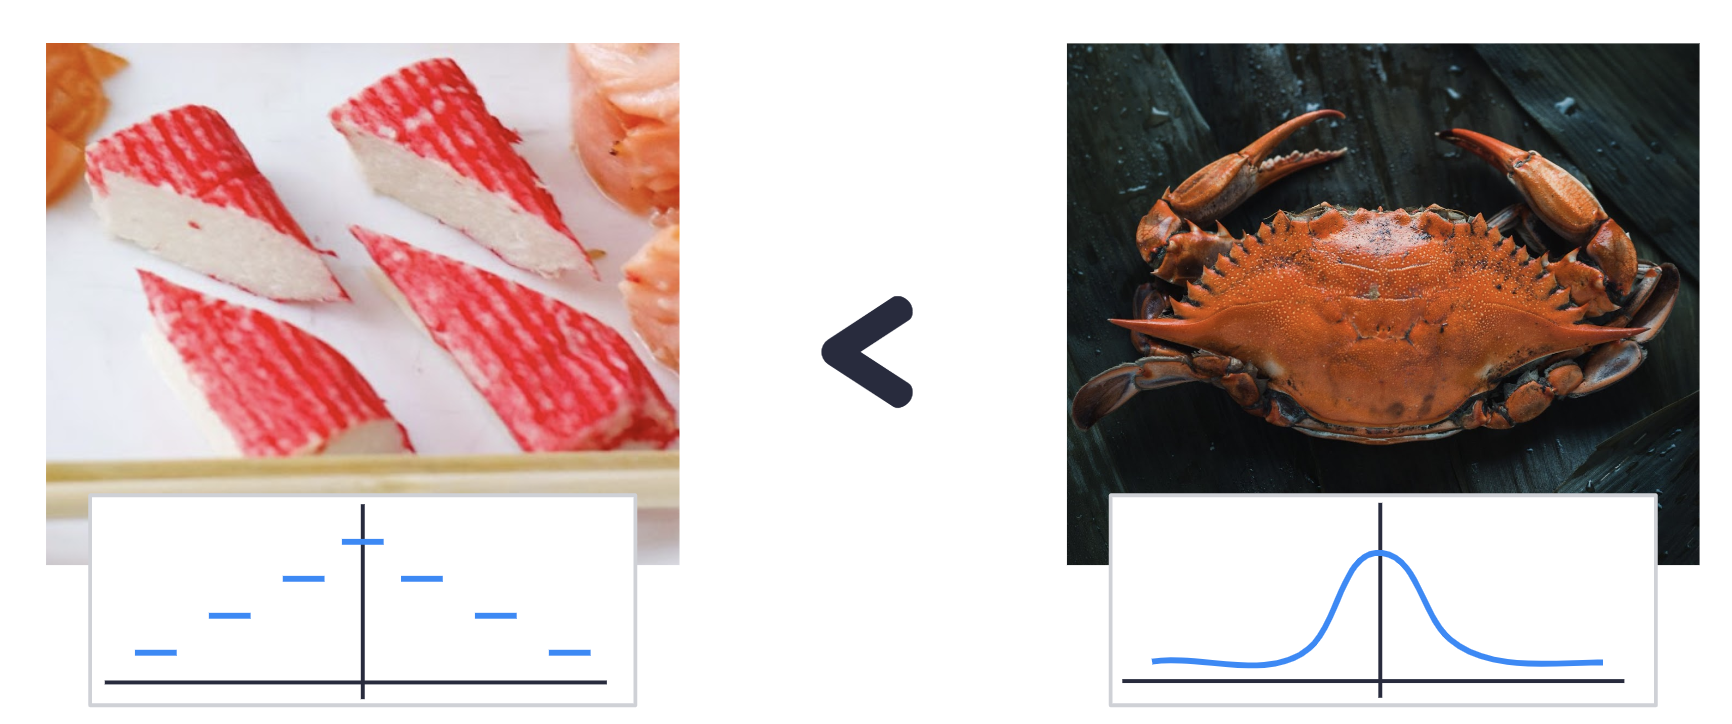 As you learn how to measure accuracy, you'll see that synthetic data (fake crab sticks) is not as good as the real thing.